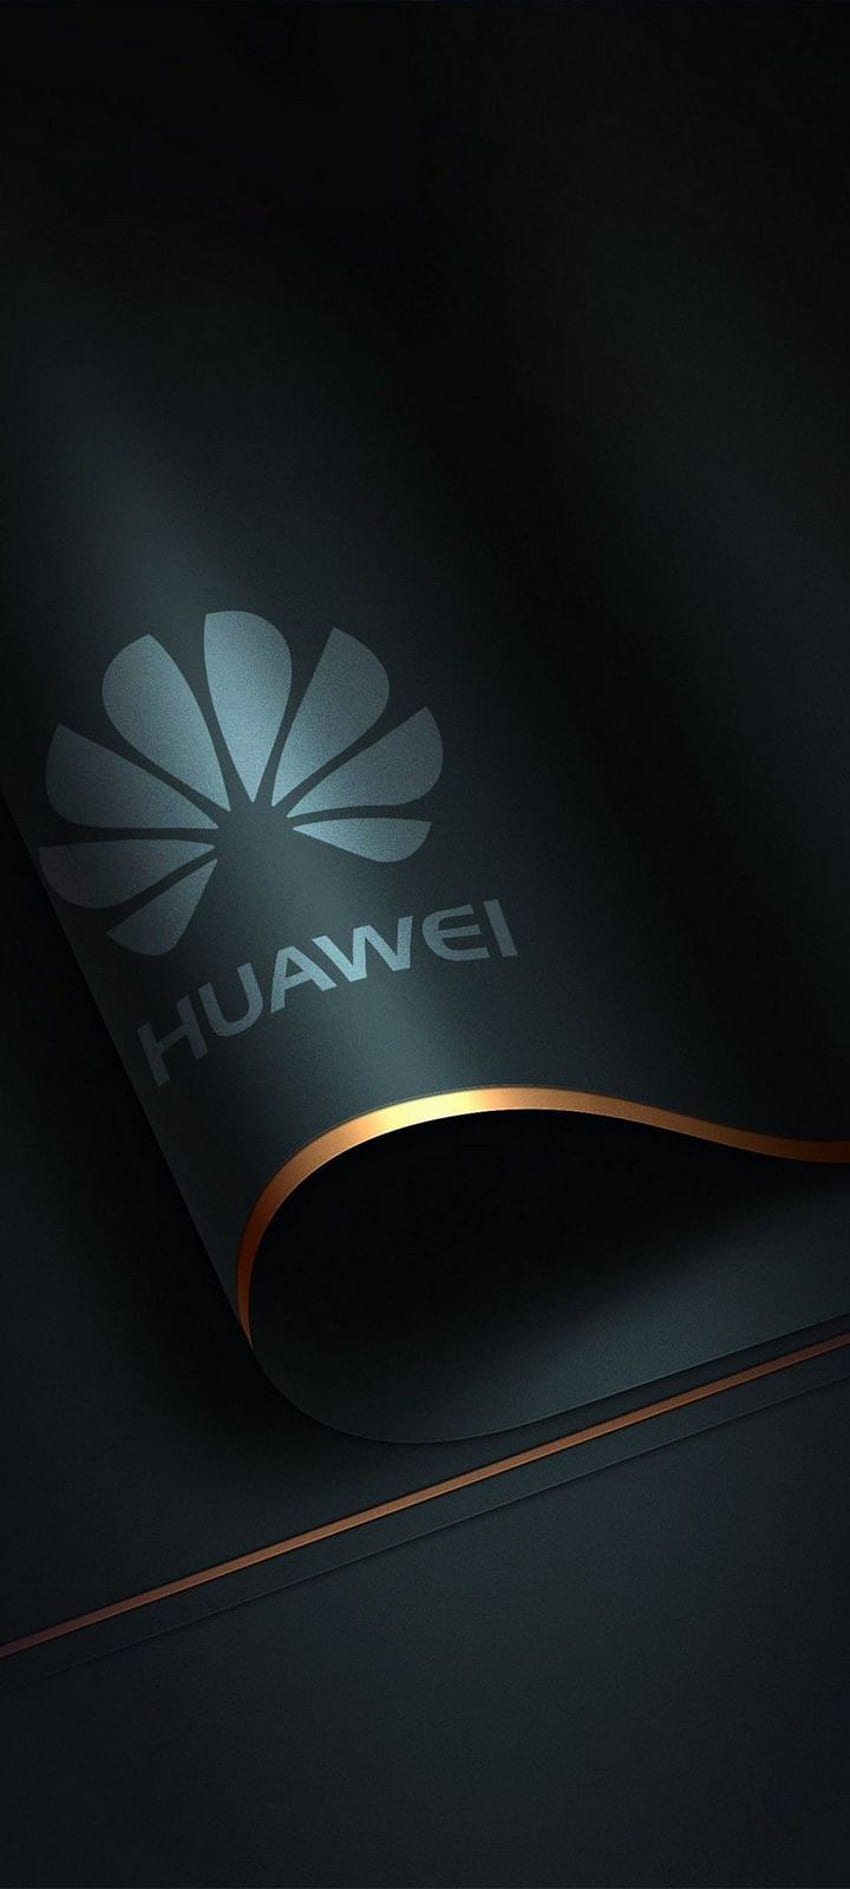 Huawei Mobile Wallpapers, HD Huawei Backgrounds, Free Images Download